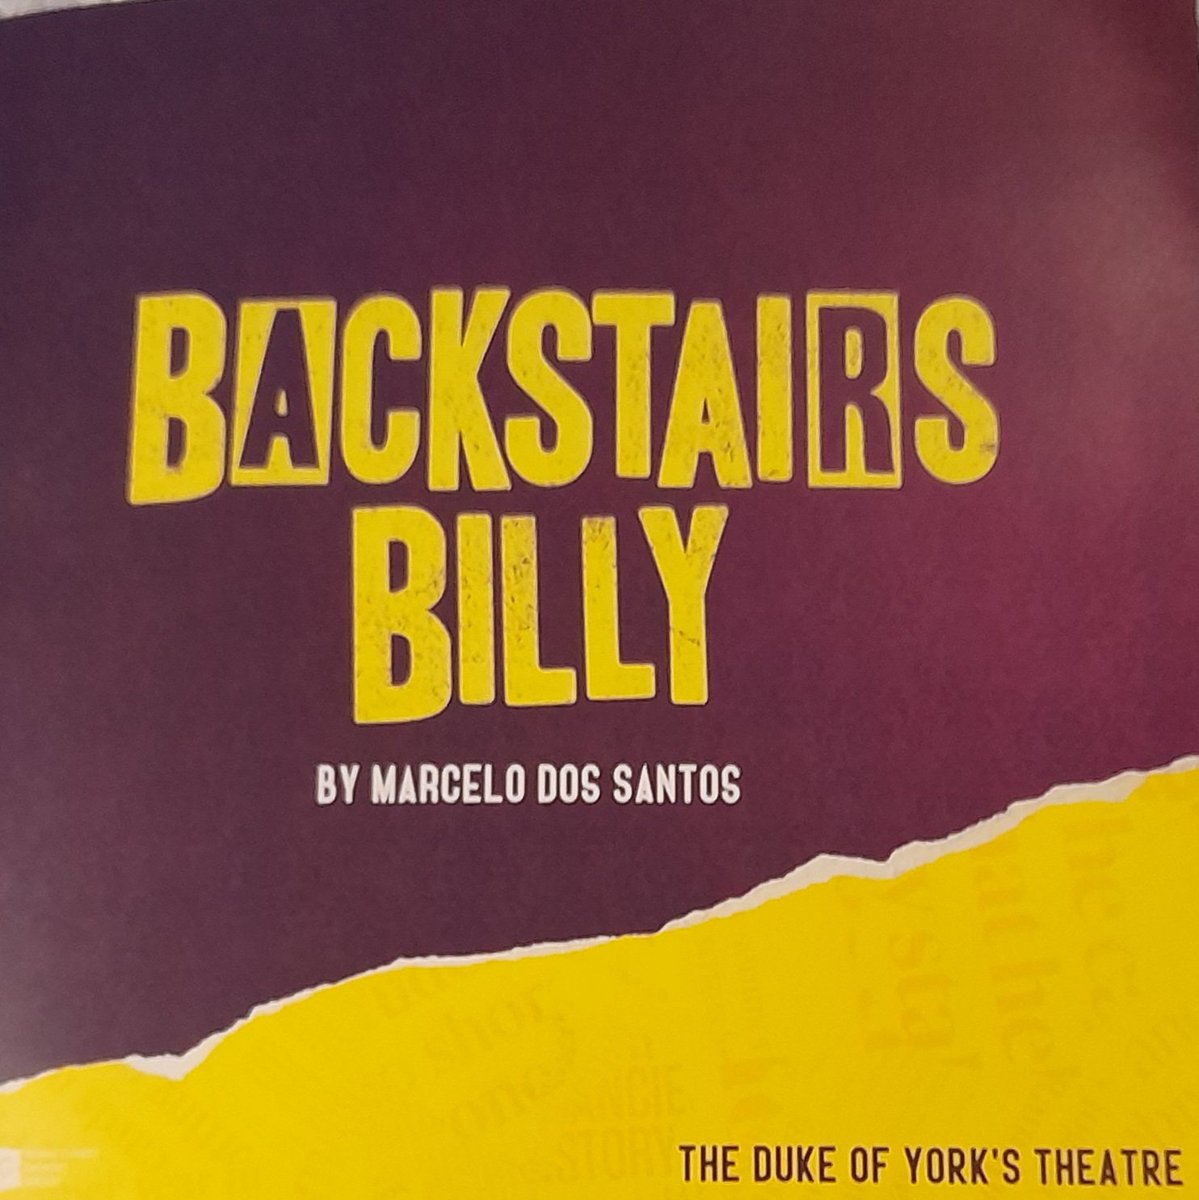 #BackstairsBilly extremely funny play  with real #corgis  #PenelopeWilton and @TheRealLukevans  are superb! @BBillyPlay   @dukeofyorksLDN